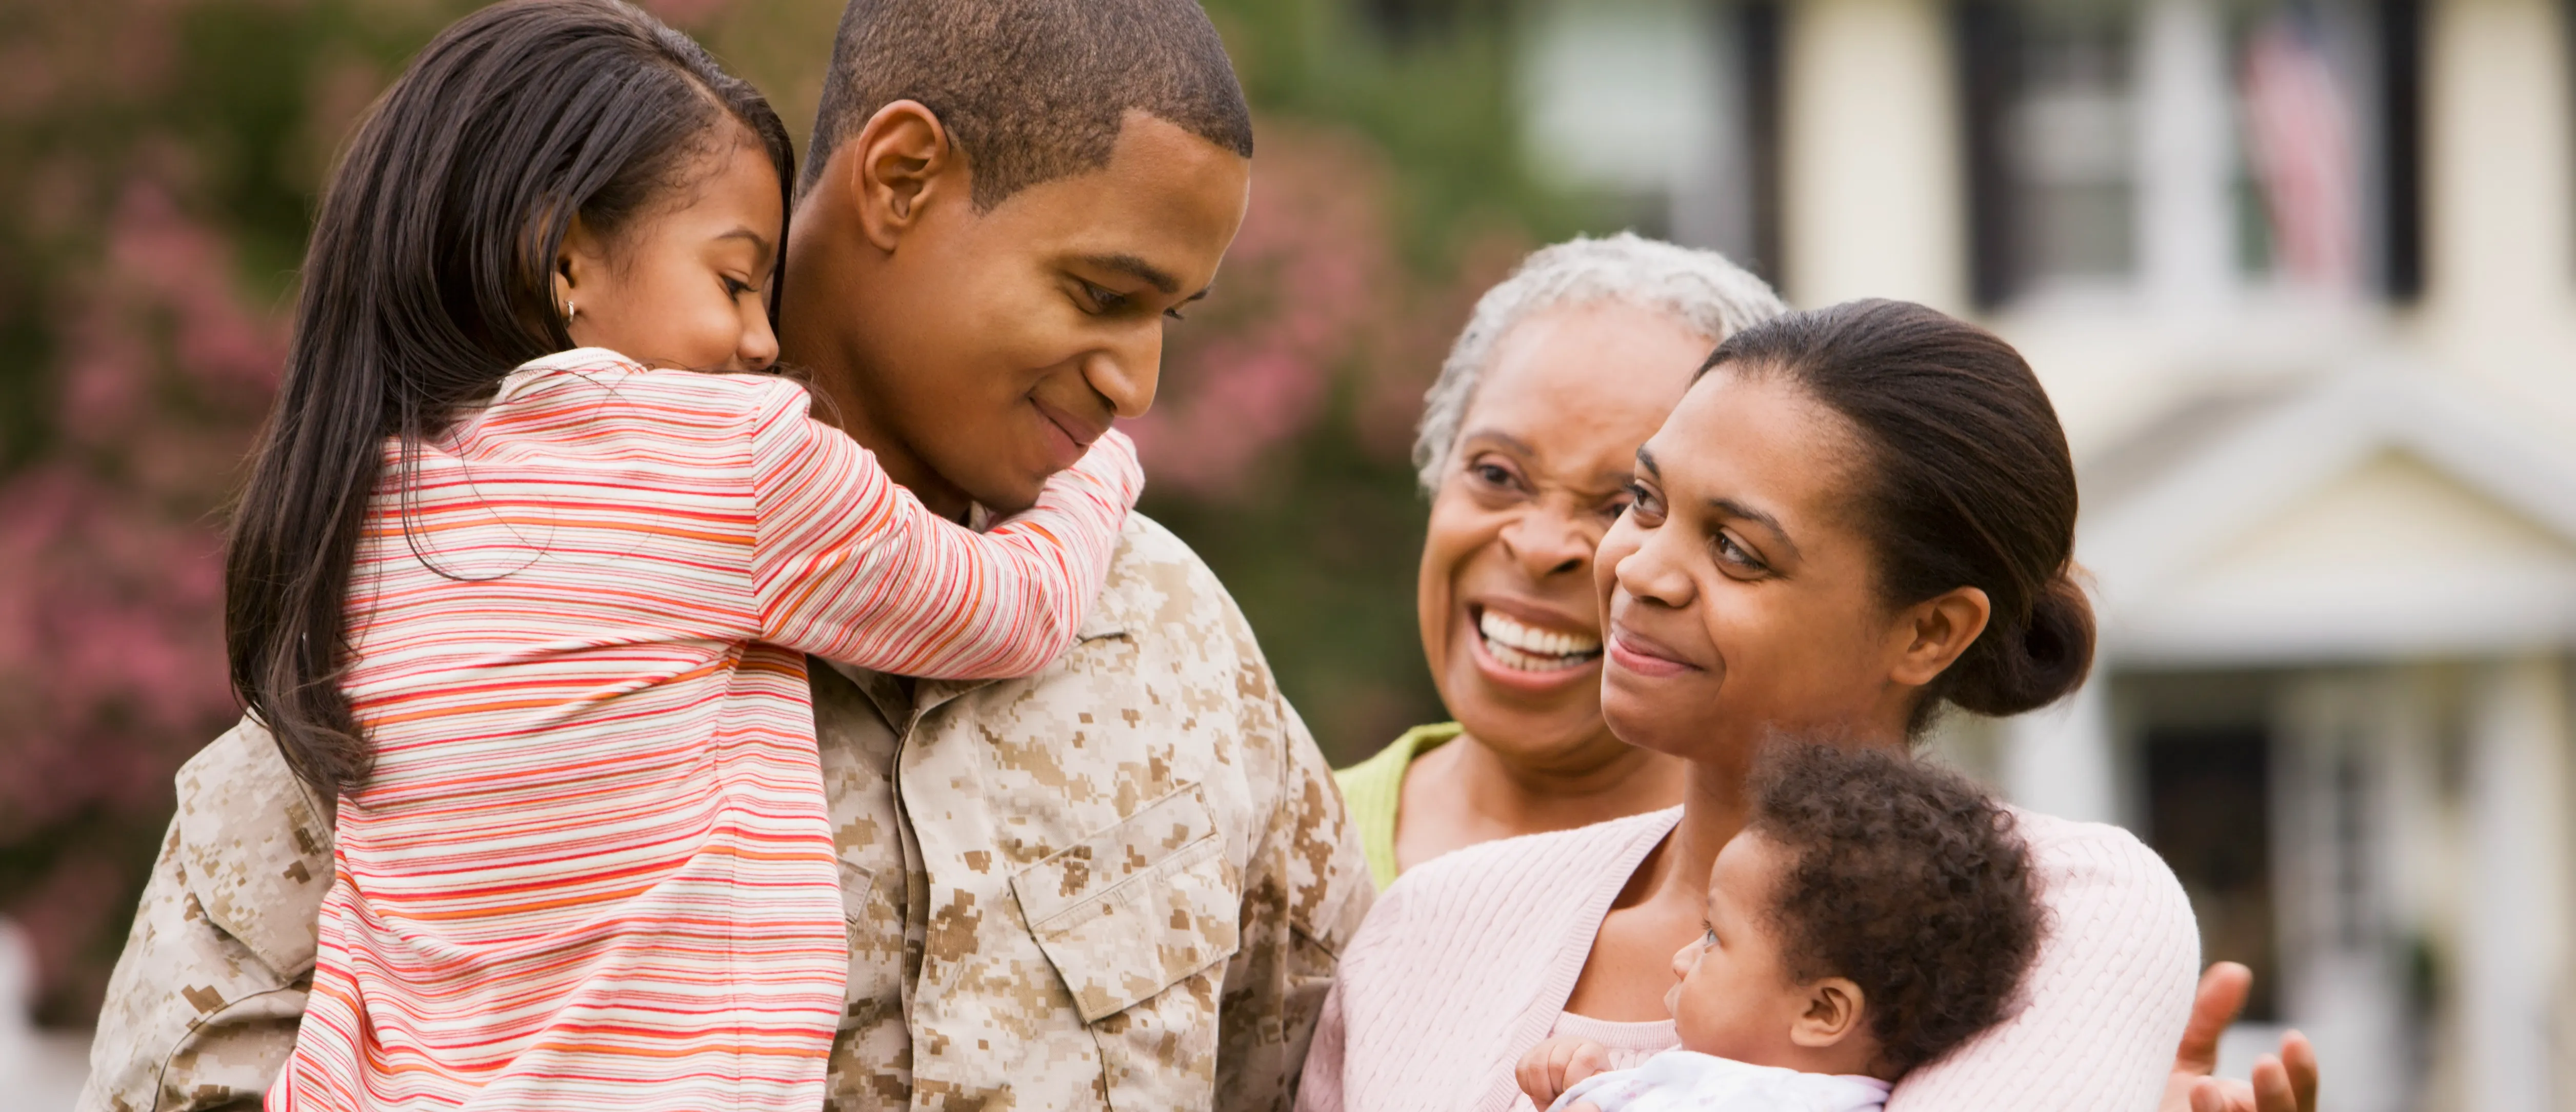 Military family looking lovingly at one another